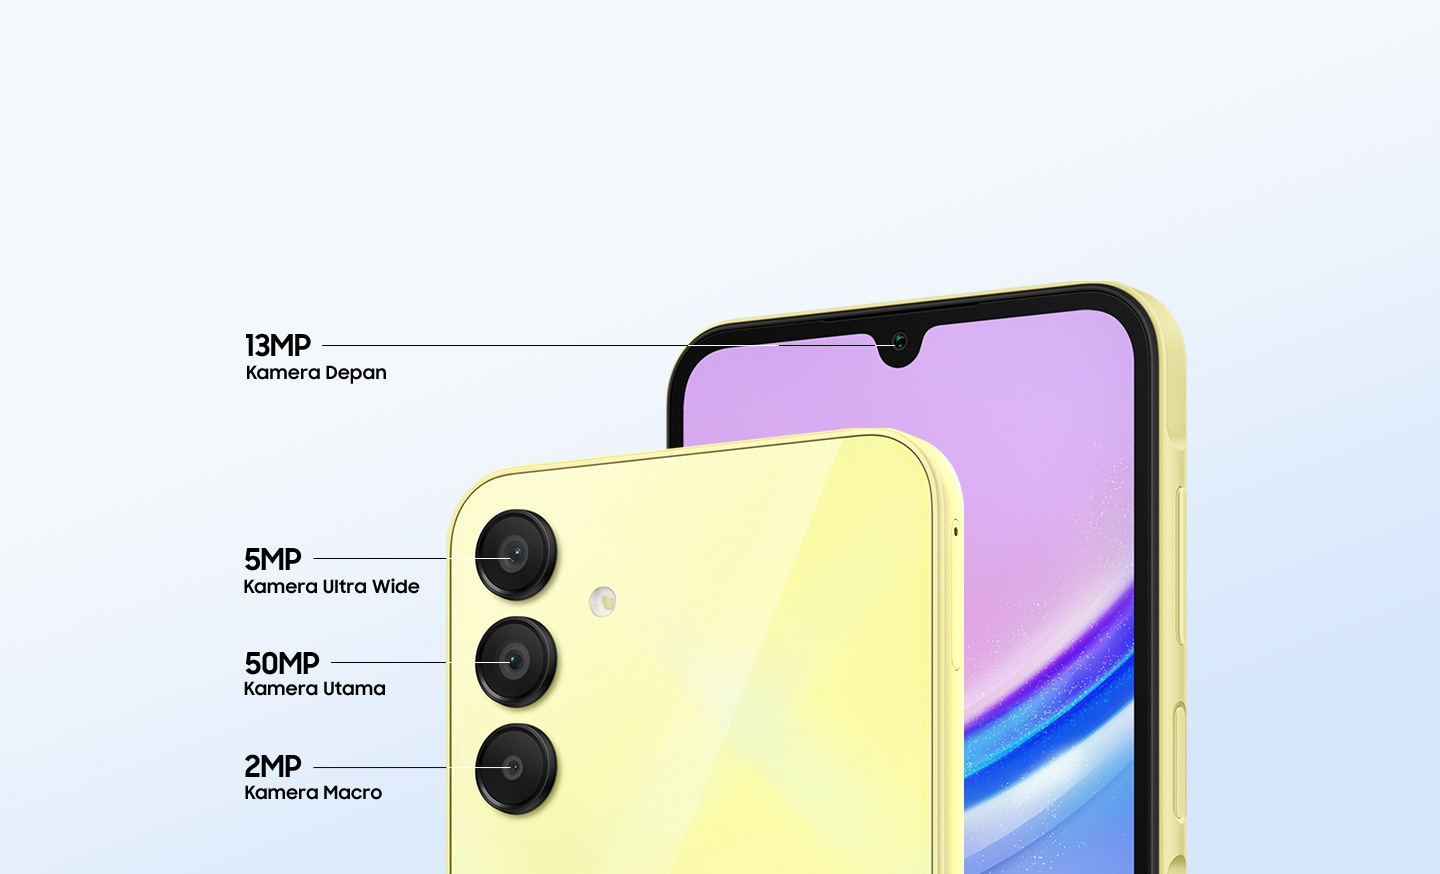 The front and back of the Galaxy A15 are shown to showcase its four multiple cameras including the 13MP Front camera, the 5MP Ultra Wide camera, the 50MP Main camera and the 2MP Macro camera.